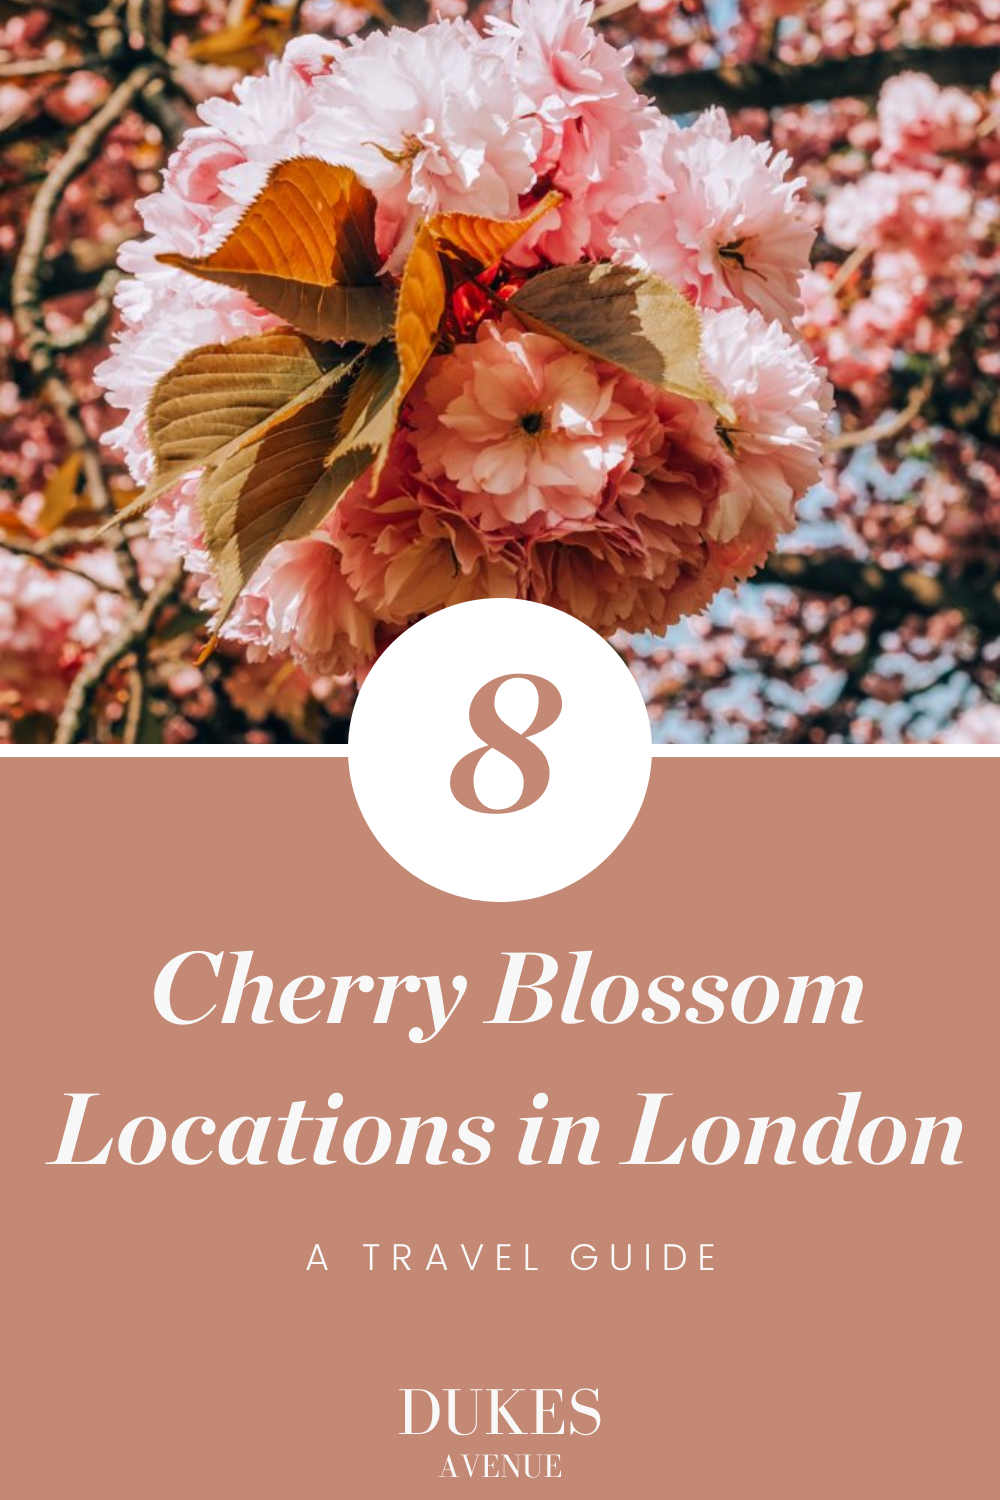 A cherry blossom with text overlay "8 Cherry Blossom Locations in London - A Travel Guide"